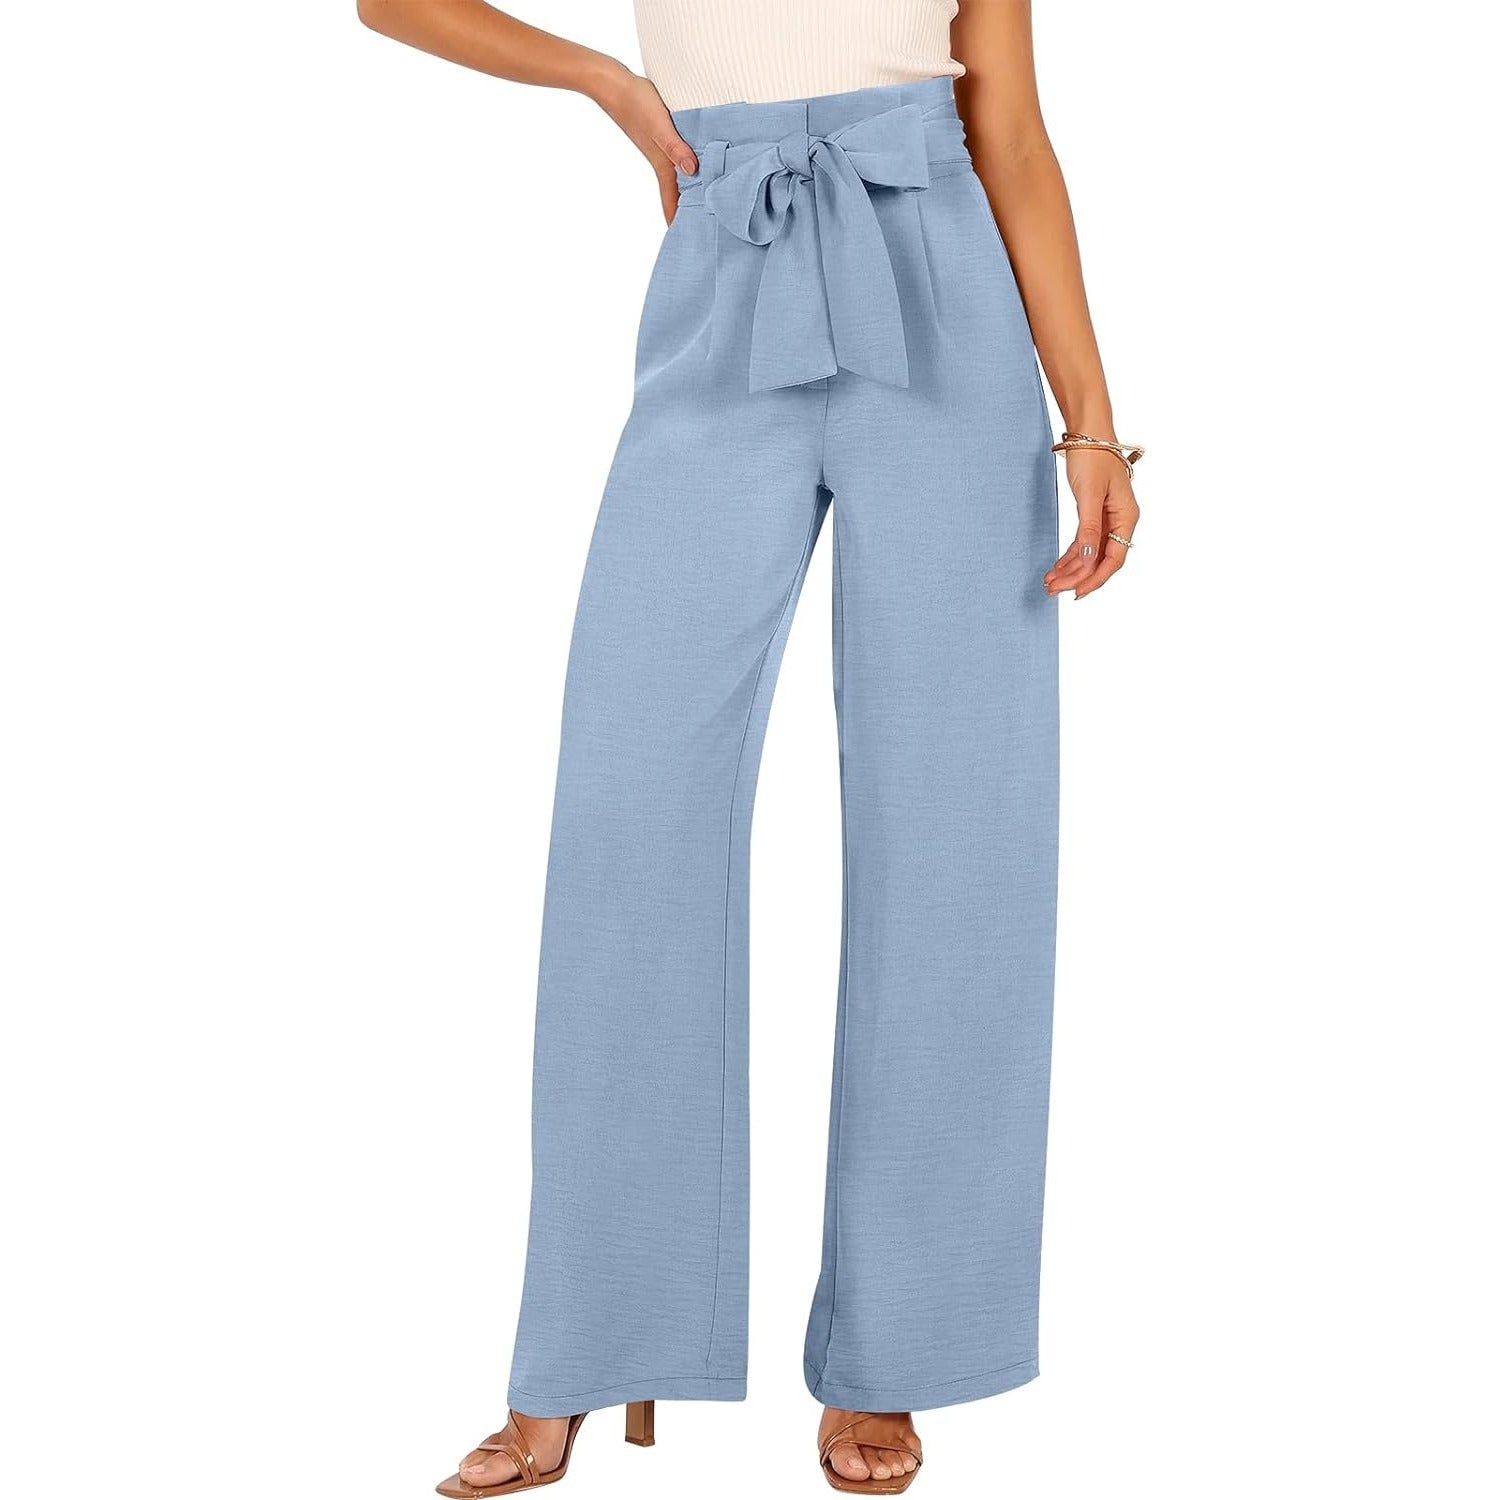 Womens Wide Leg Palazzo Pants Belted High Waisted Business Casual Long Trousers with Pockets